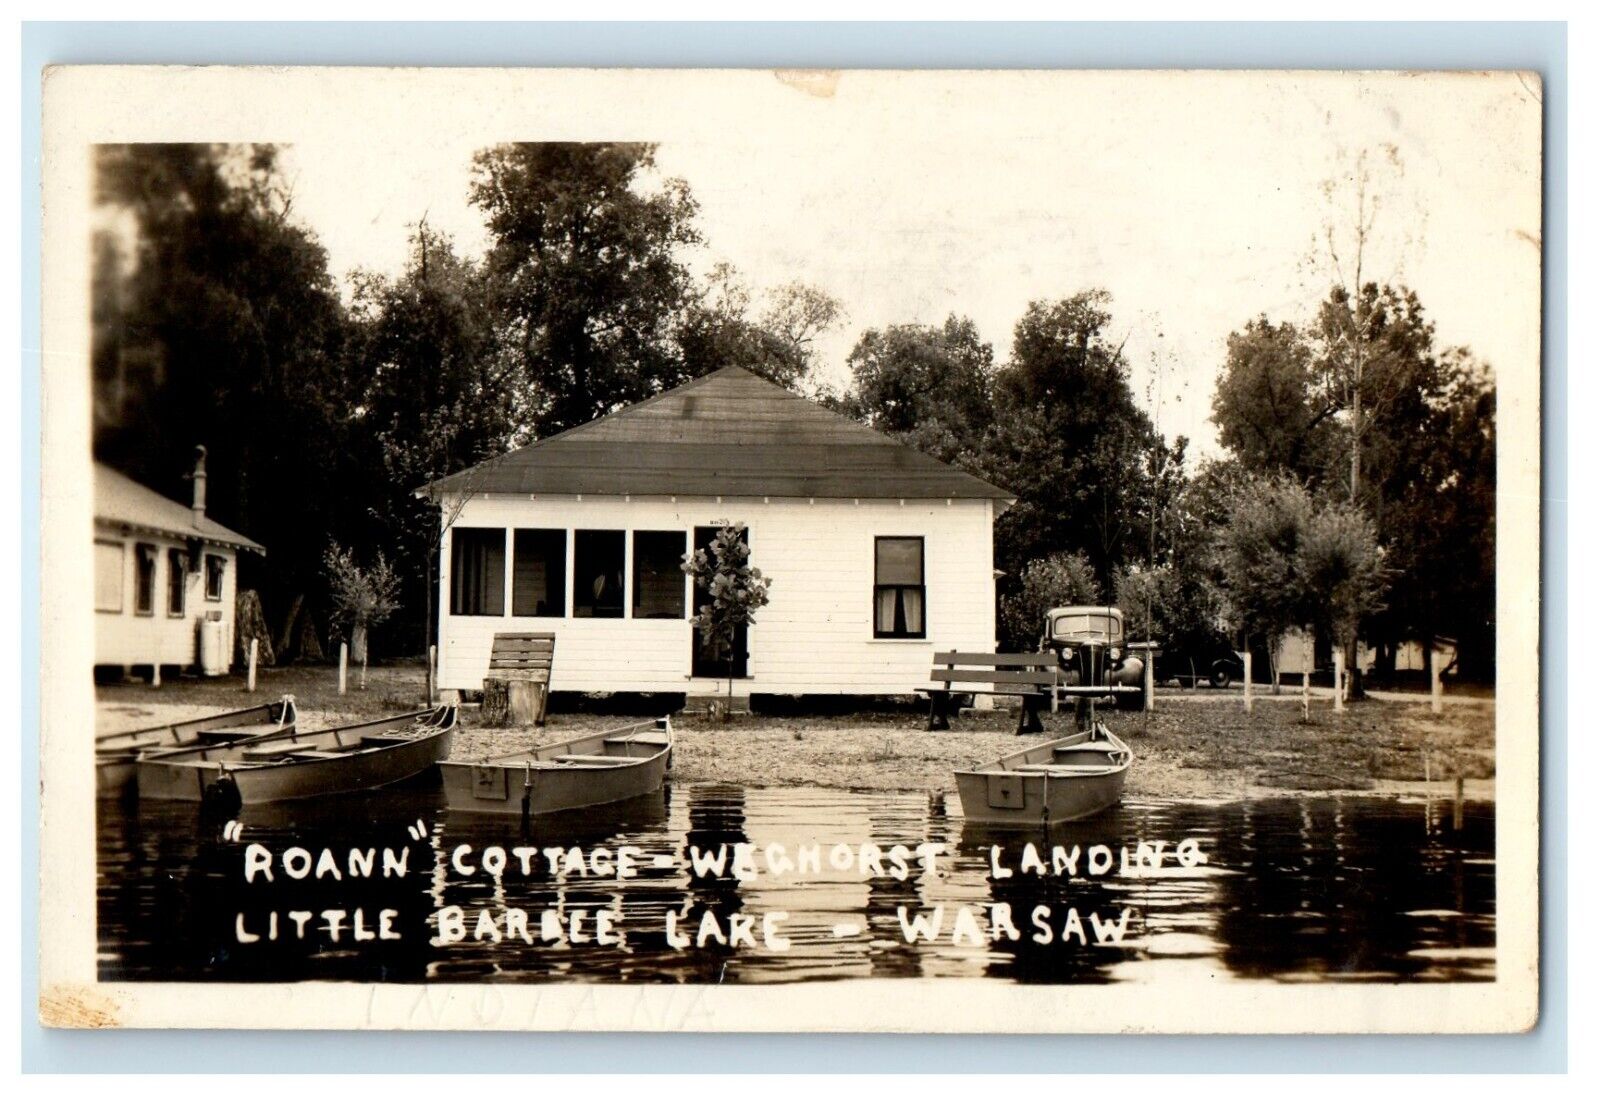 1941 Roann Cottage Little Barbee Lake Warsaw Indiana IN RPPC Photo Postcard